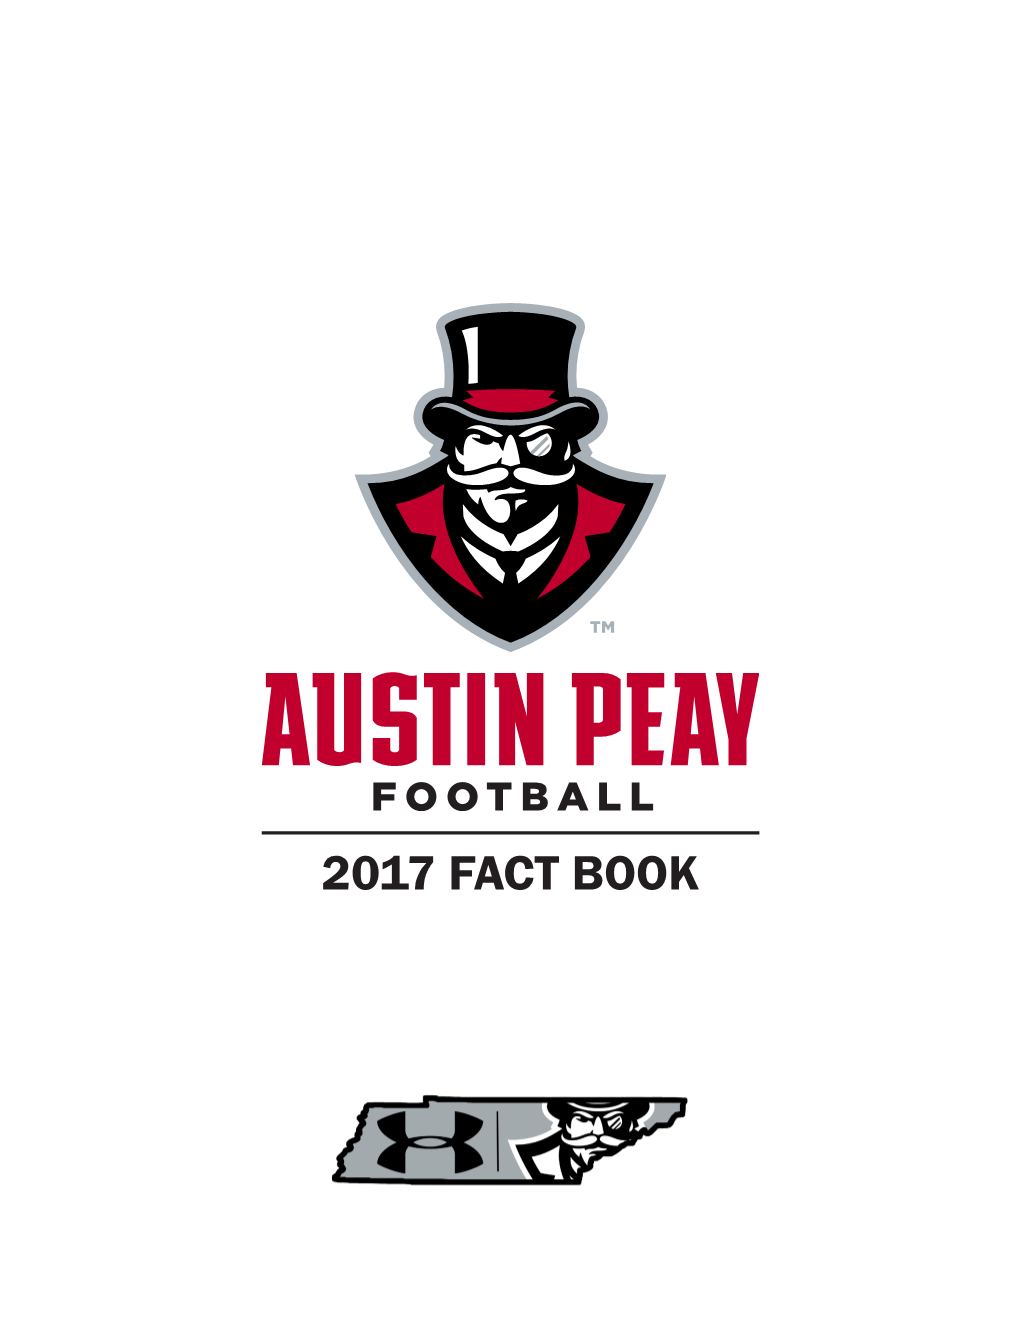 2017 Fact Book Under Armour Is Proud to Outfit Austin Peay Football in the World’S Most Innovative Footwear, Uniforms & Training Gear